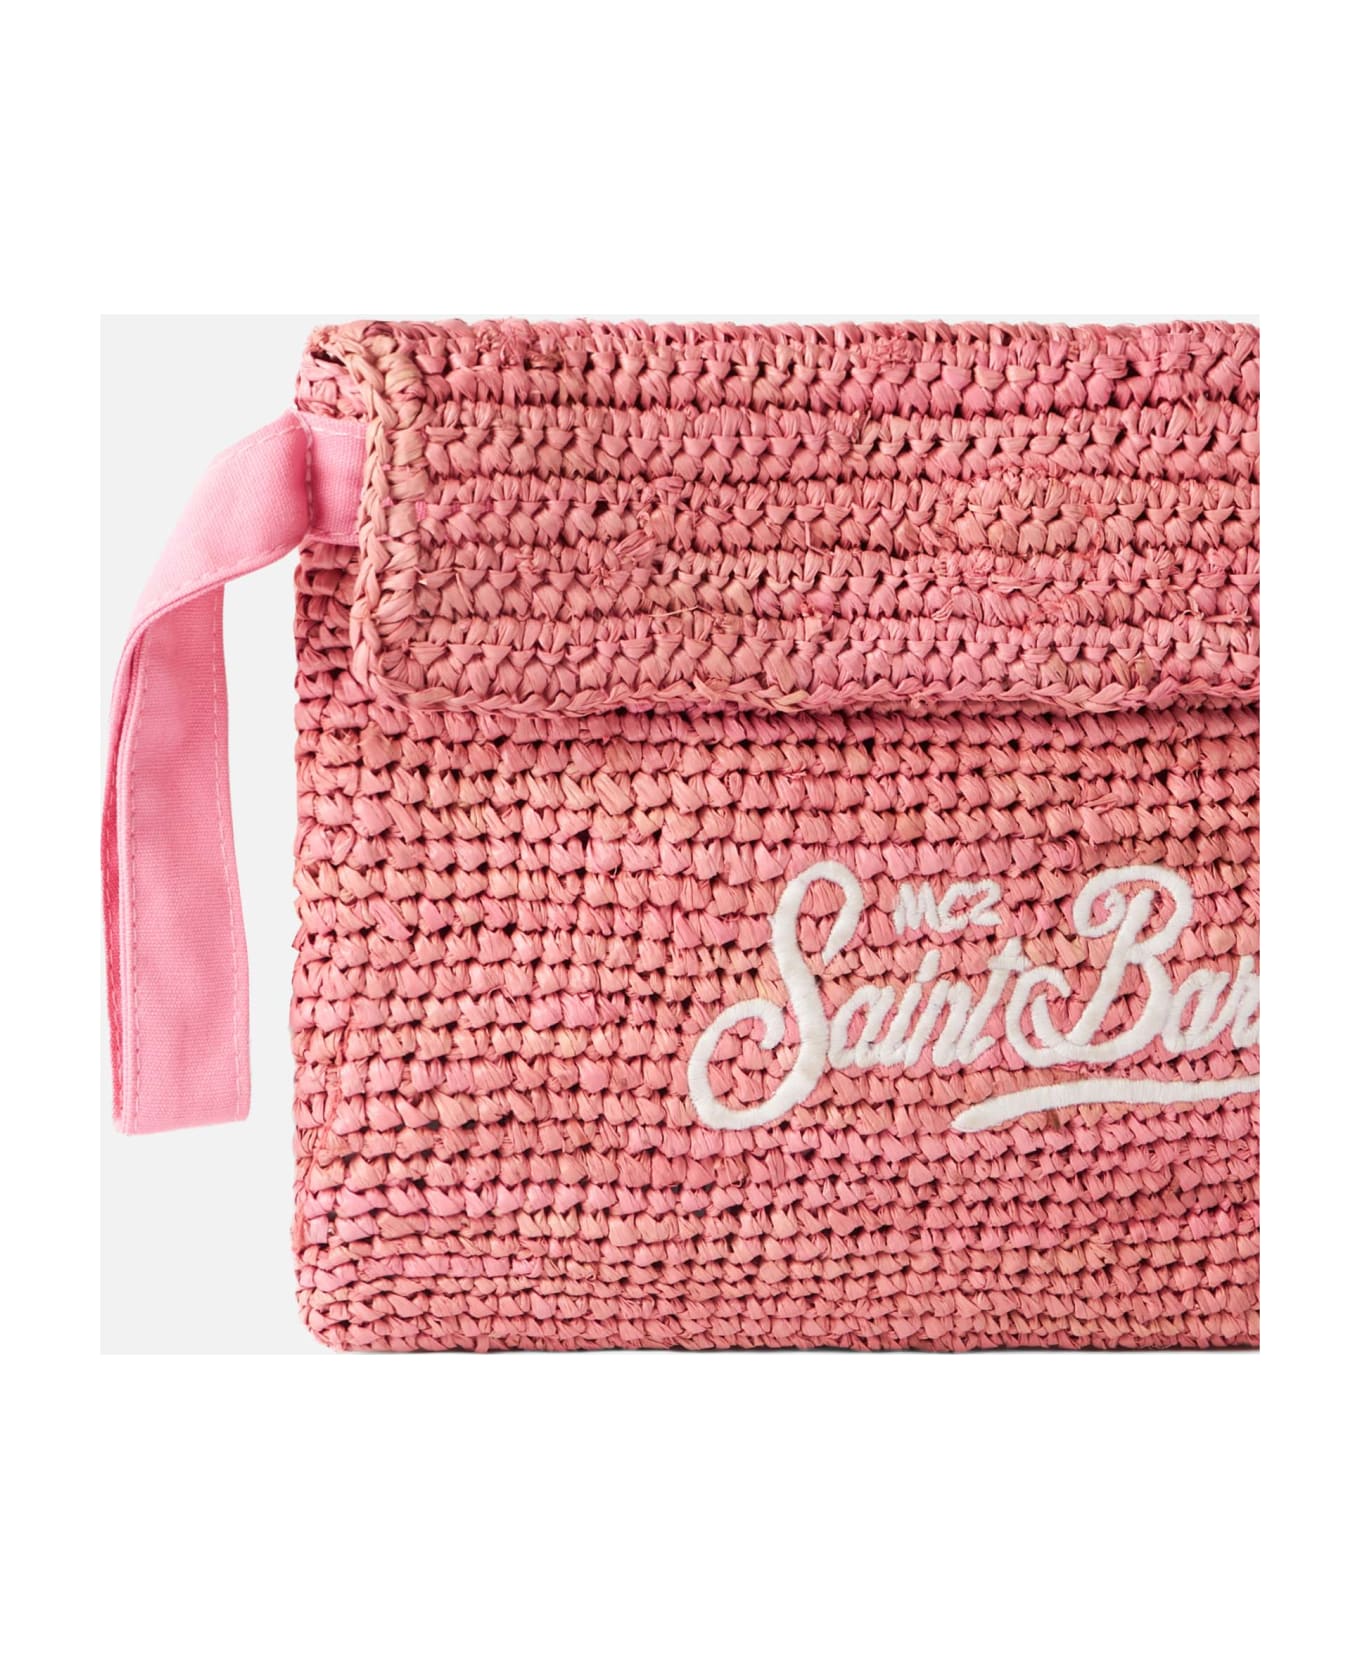 MC2 Saint Barth Raffia Pink Pouch Bag With Front Embroidery - PINK クラッチバッグ